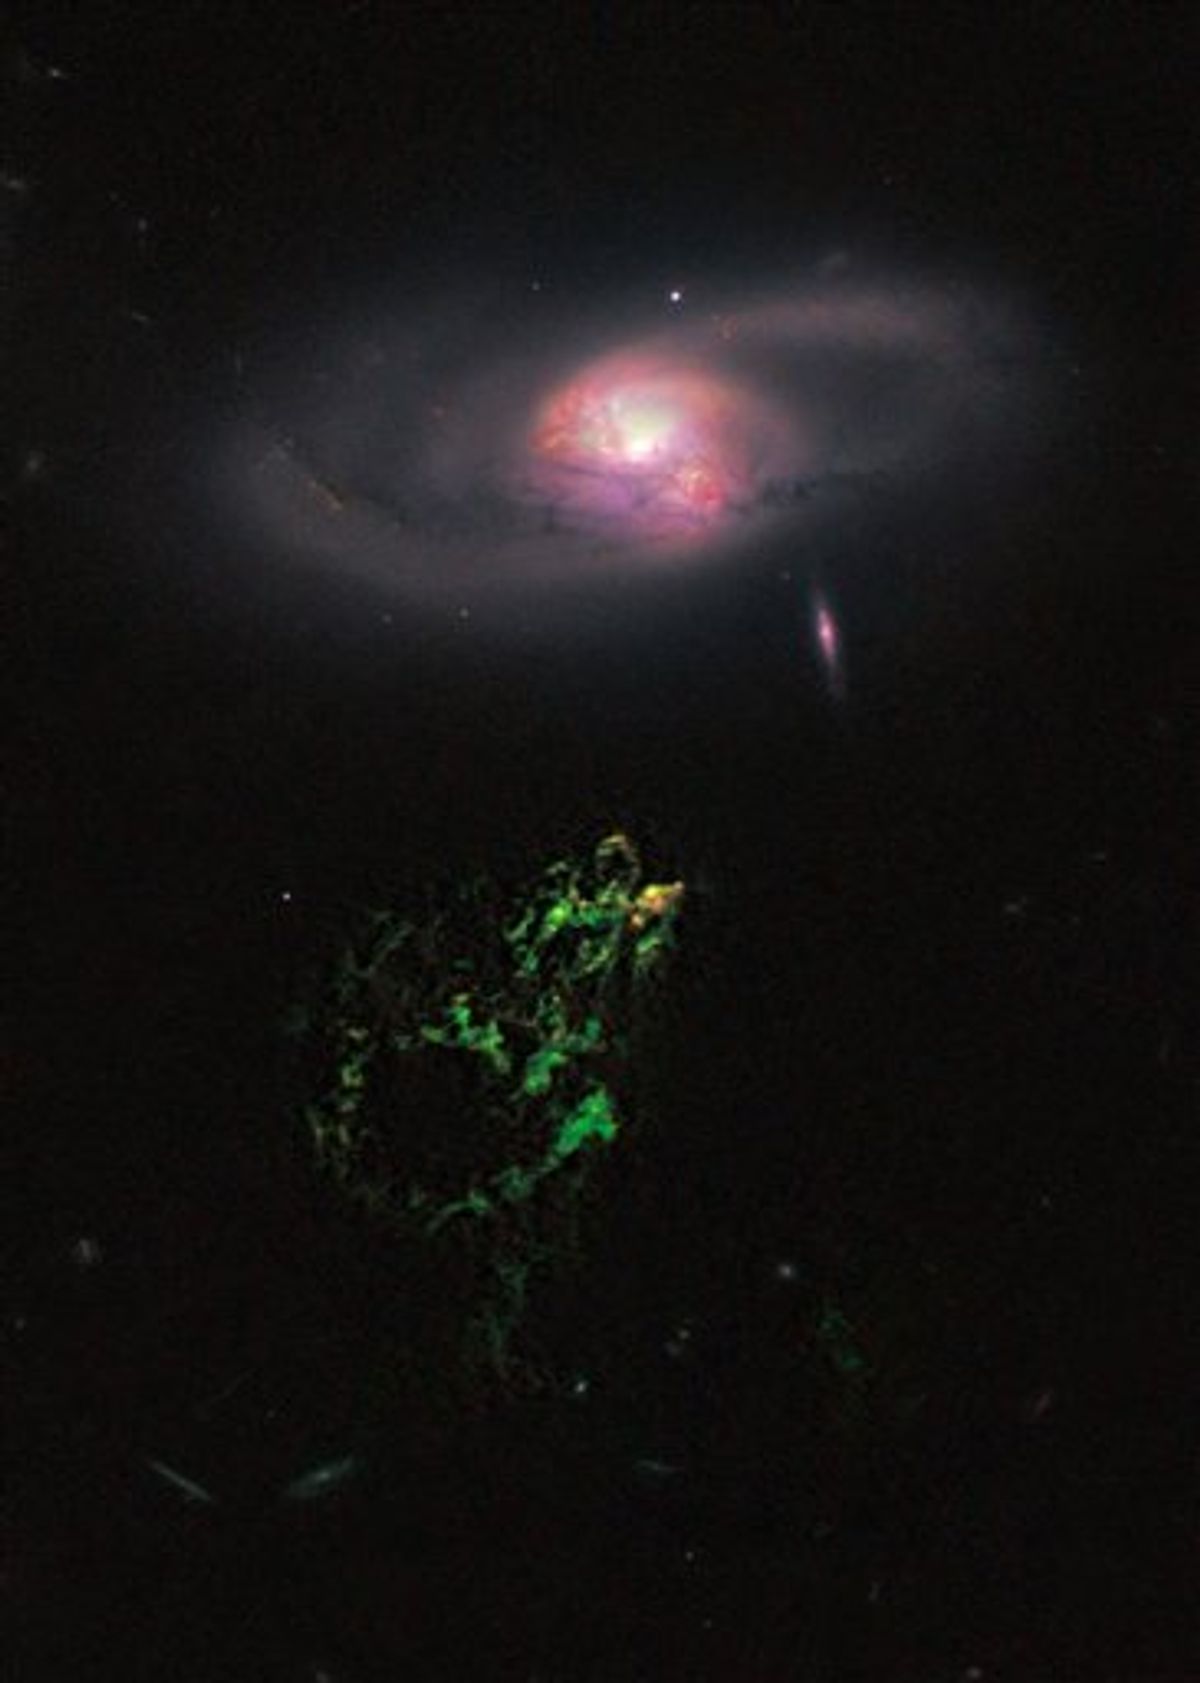 This handout photo provided by NASA, taken April 12, 2010 by the Hubble Space Telescope, shows an unusual, ghostly green blob of gas appears to float near a normal-looking spiral galaxy. NASA released Monday the Hubble Space Telescopes first picture of the mysterious giant glowing green blob of gas called Hannys Voorwerp.  The blob is the size of our Milky Way galaxy and is 650 million light years away. Each light year is about 6 trillion miles. The blob was discovered in 2007 by Dutch school teacher Hanny van Arkel. (AP Photo/Hubble Space Telescope Science Institute)  (AP)